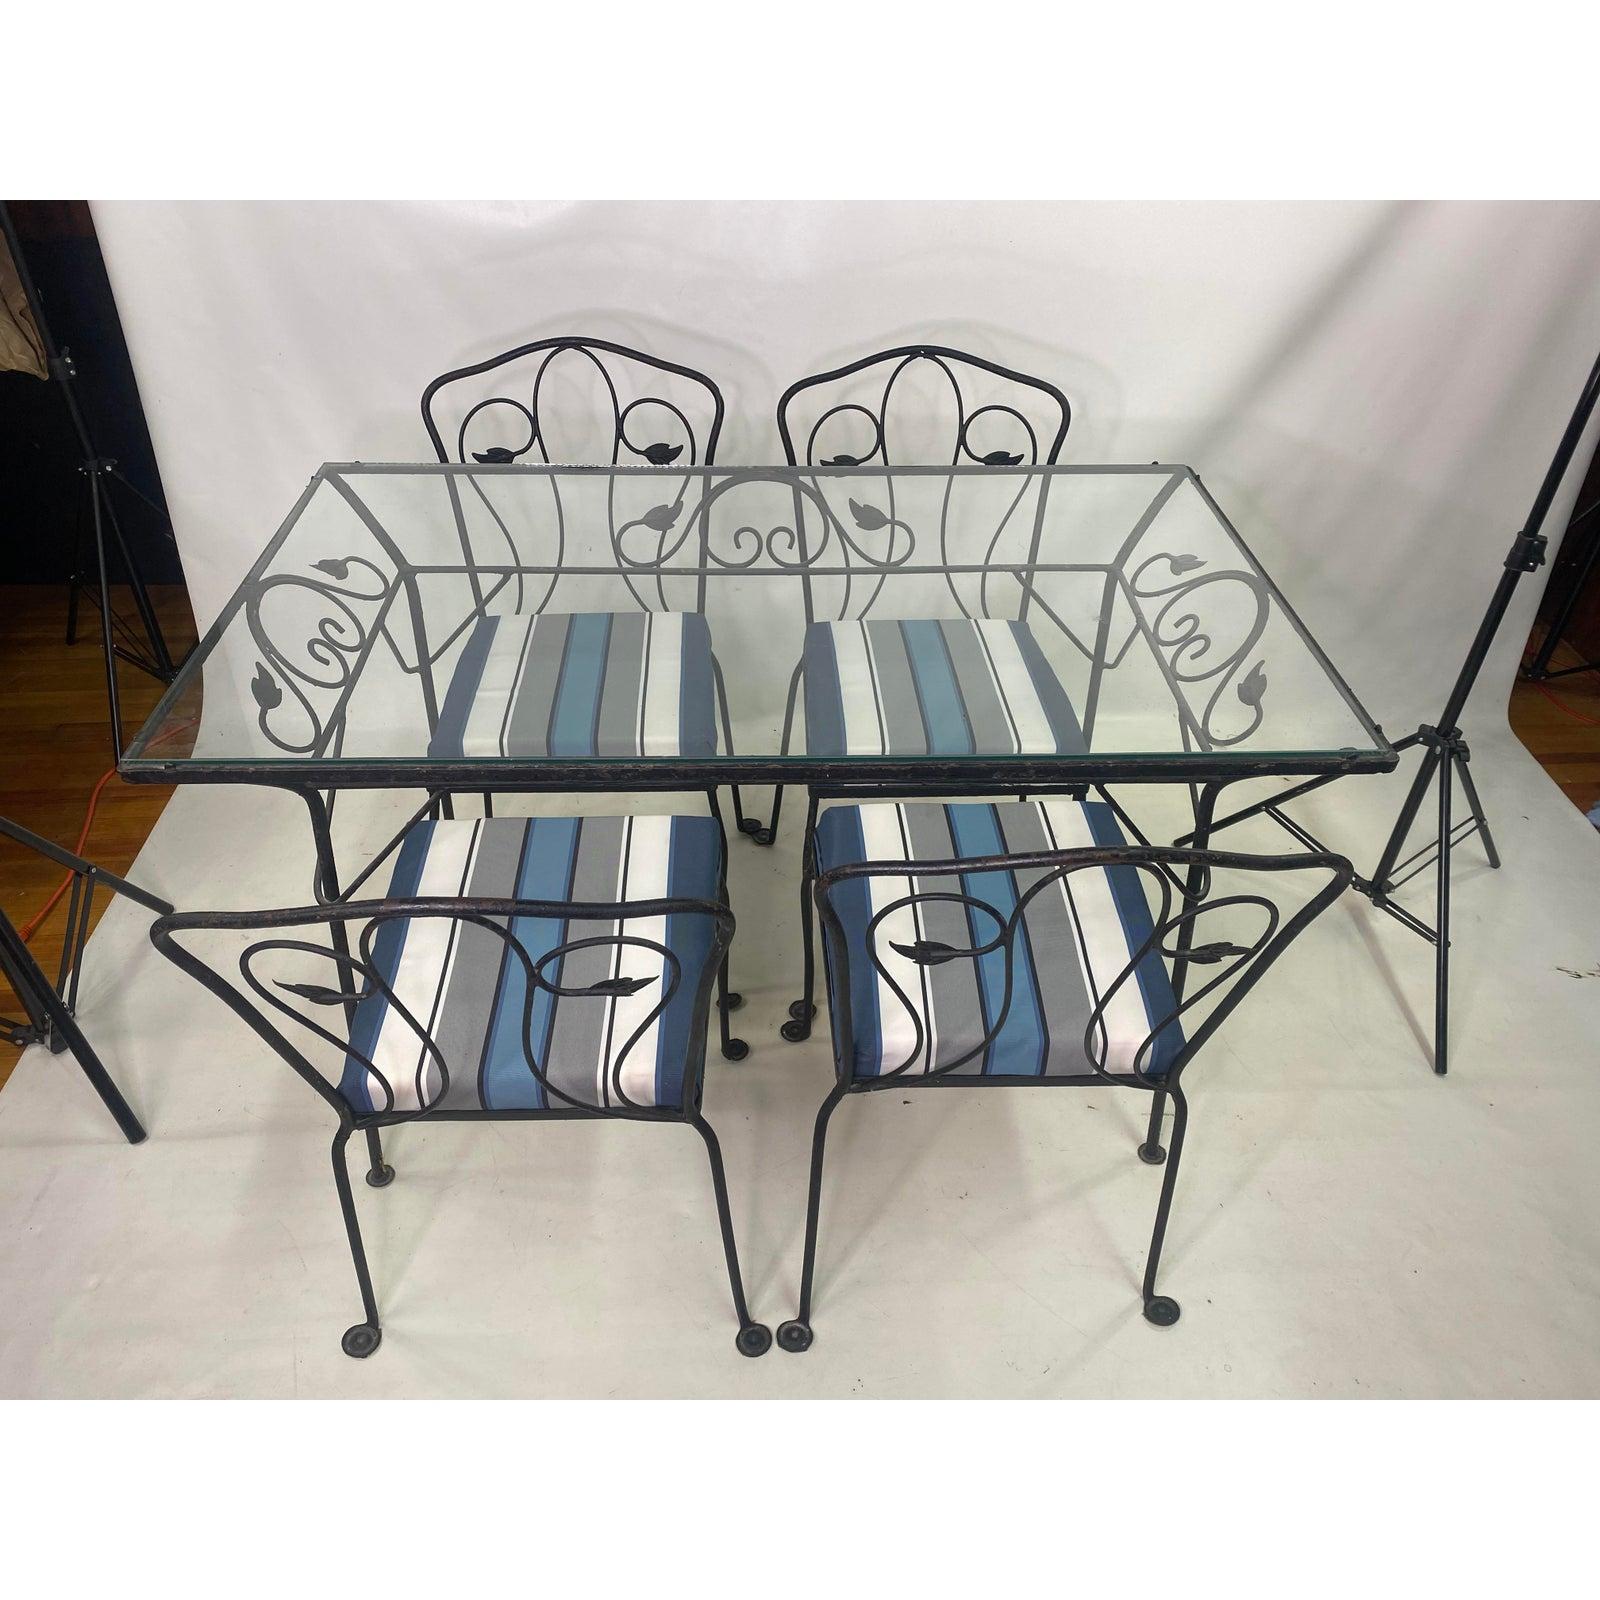 Mid century Salterini patio set - 5 pieces

Table measurements are:
48.5” W 29” D 29.75” H

Chairs measurements are:
18” W 19” D 33 1/2” H
Seat H: 19”.